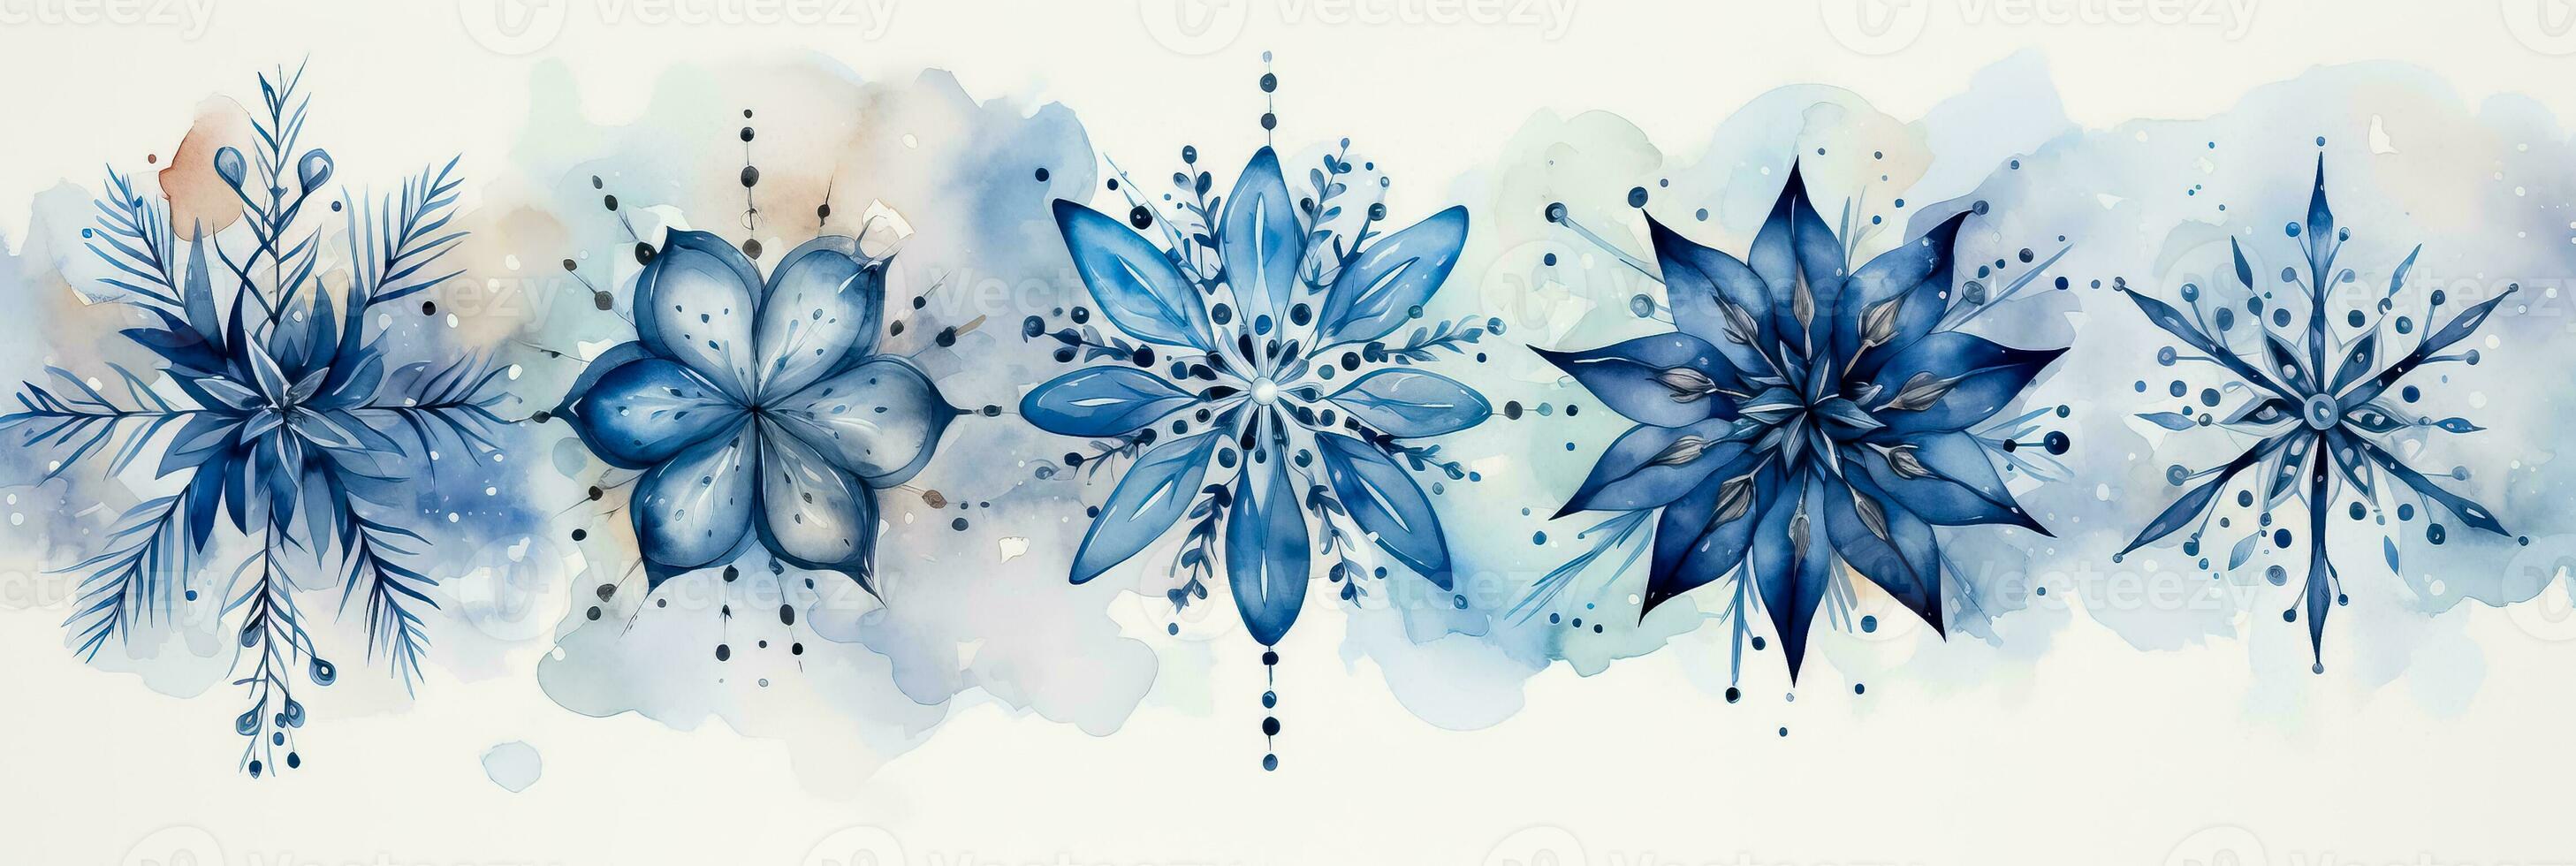 Beautiful watercolor illustrations of intricate snowflakes against tranquil winter backgrounds photo